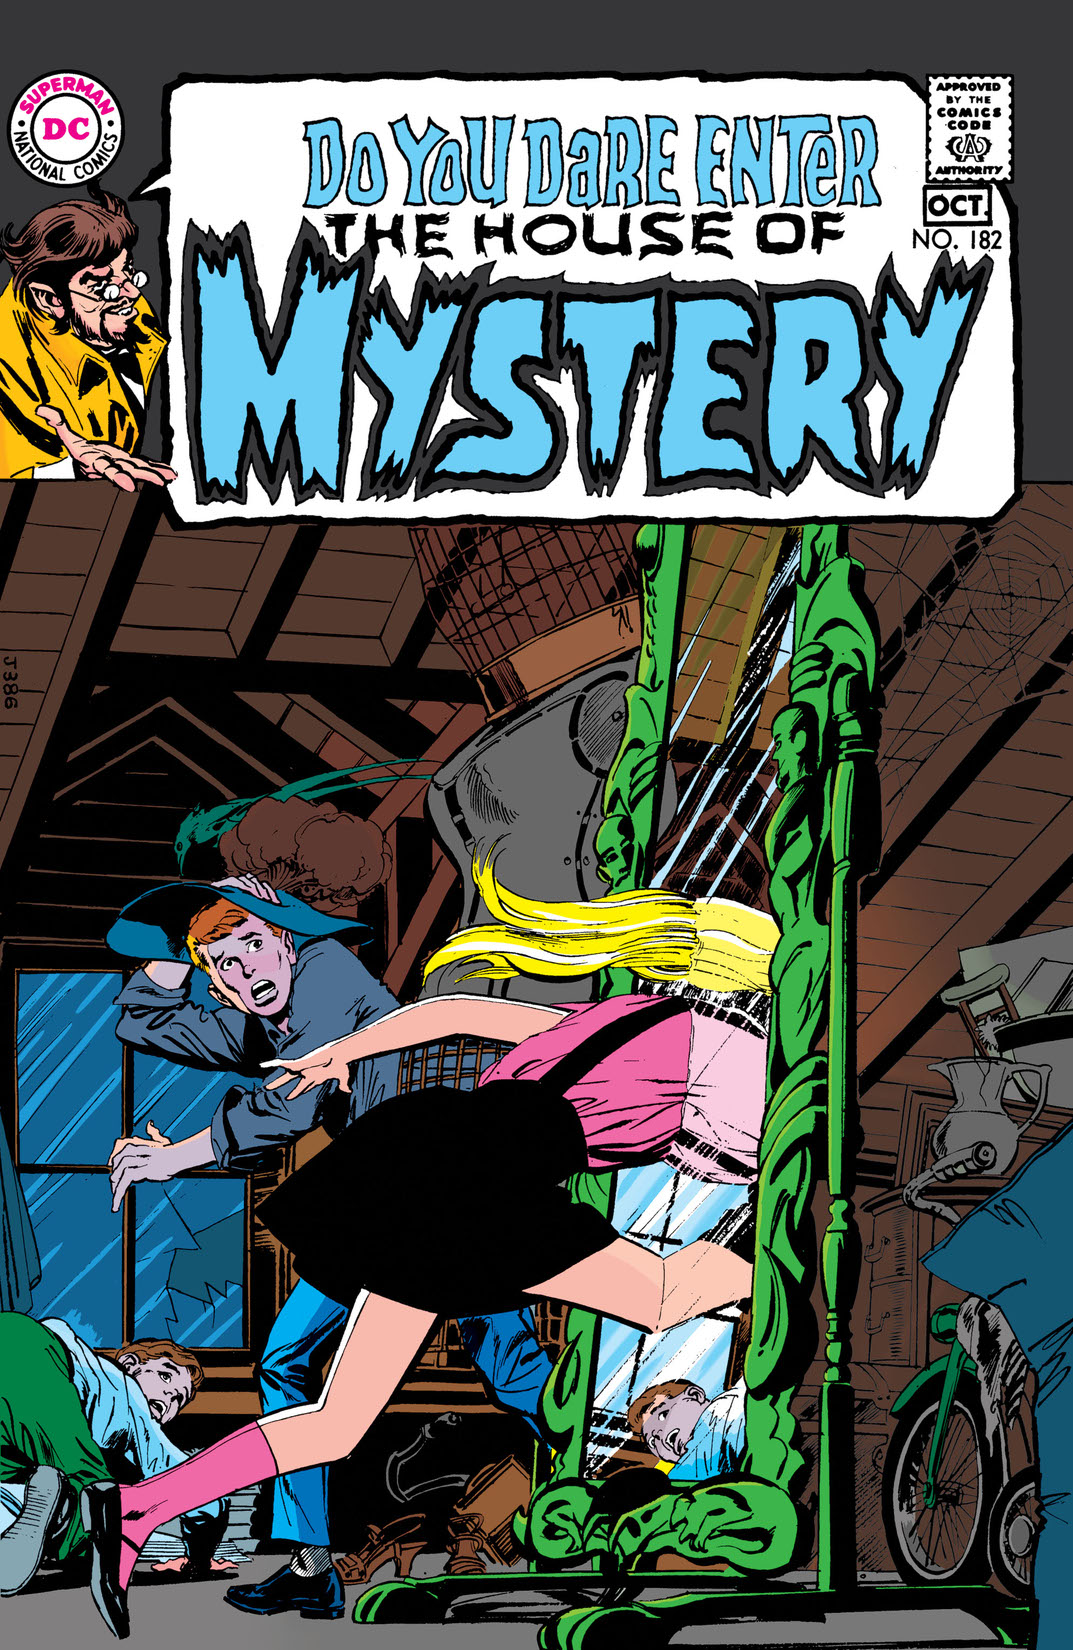 House of Mystery (1951-) #182 preview images